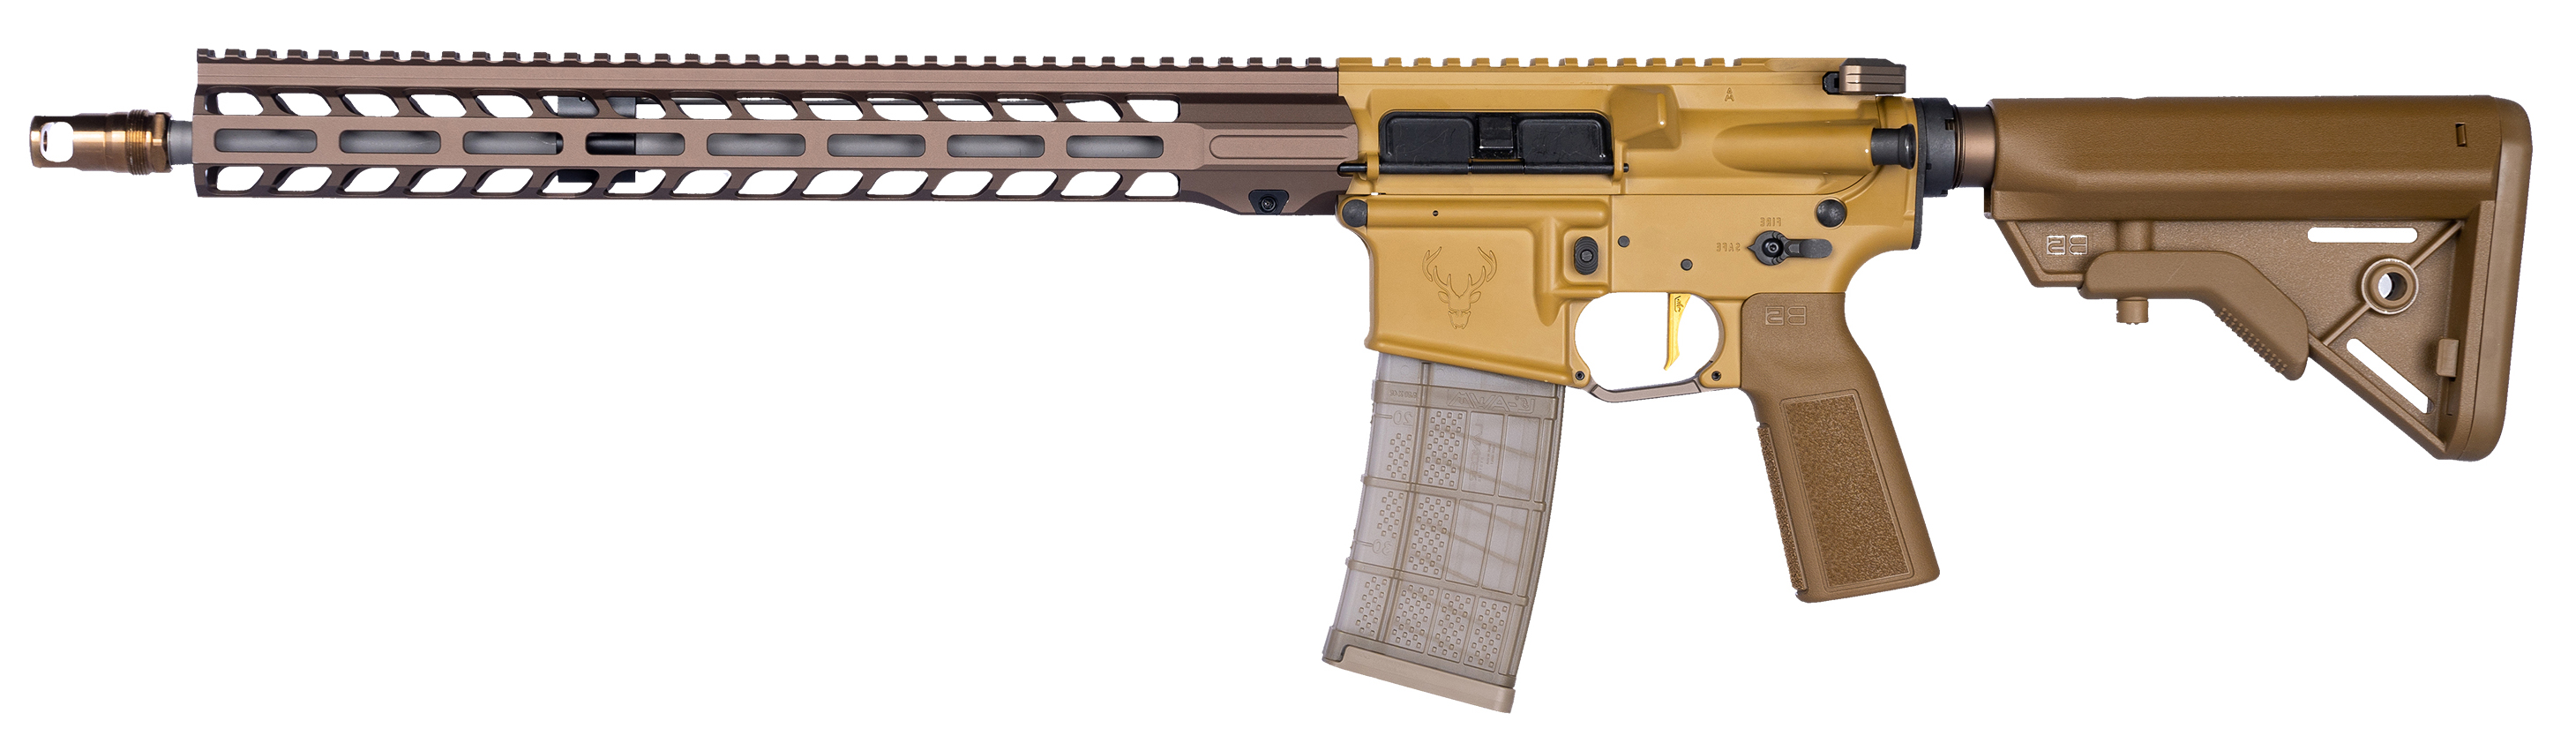 STAG 15 PROJECT SPCTRM 5.56 16